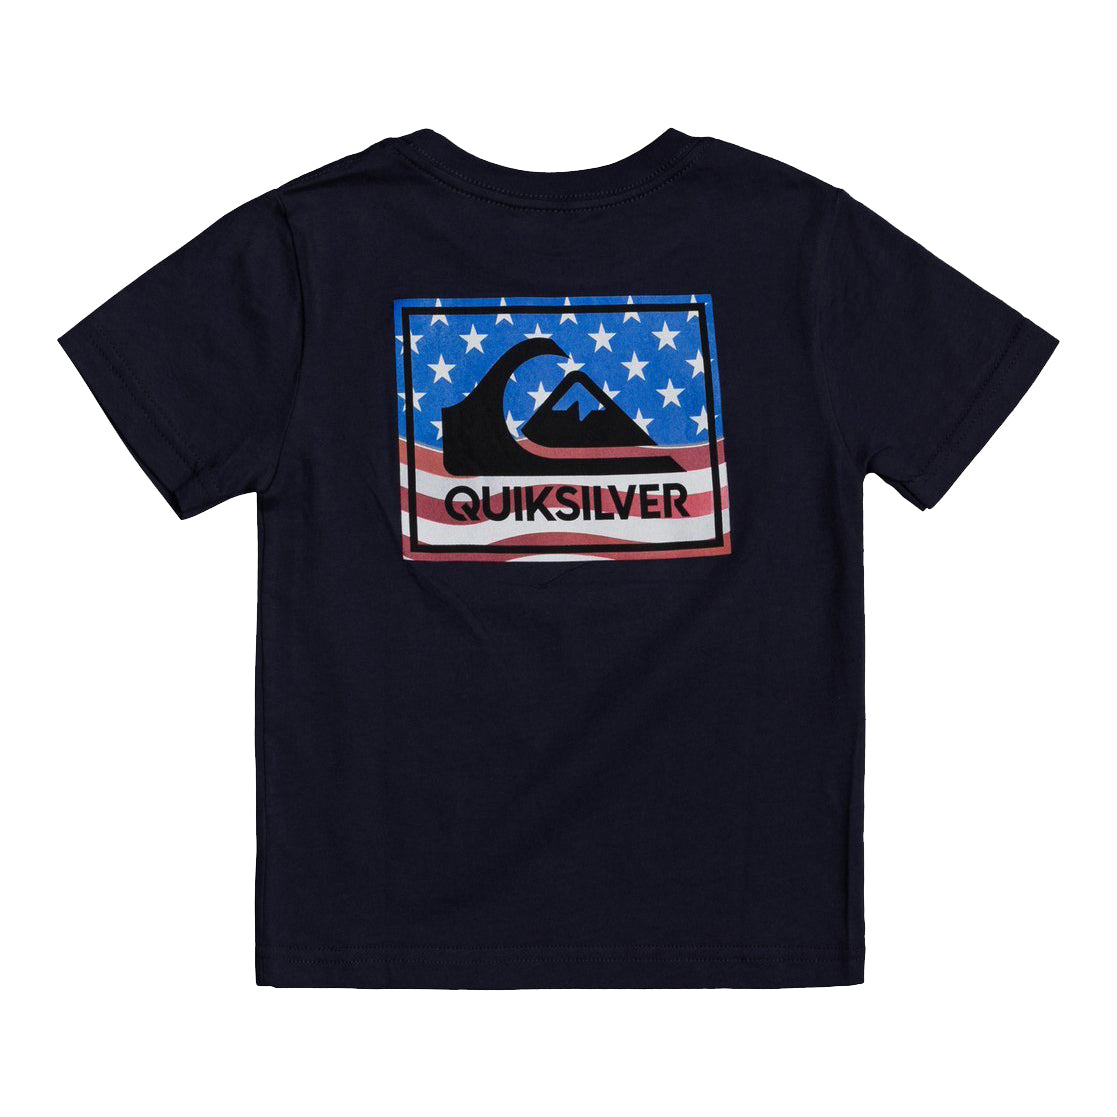 Quiksilver Architexure Youth Tee BYJ0 2